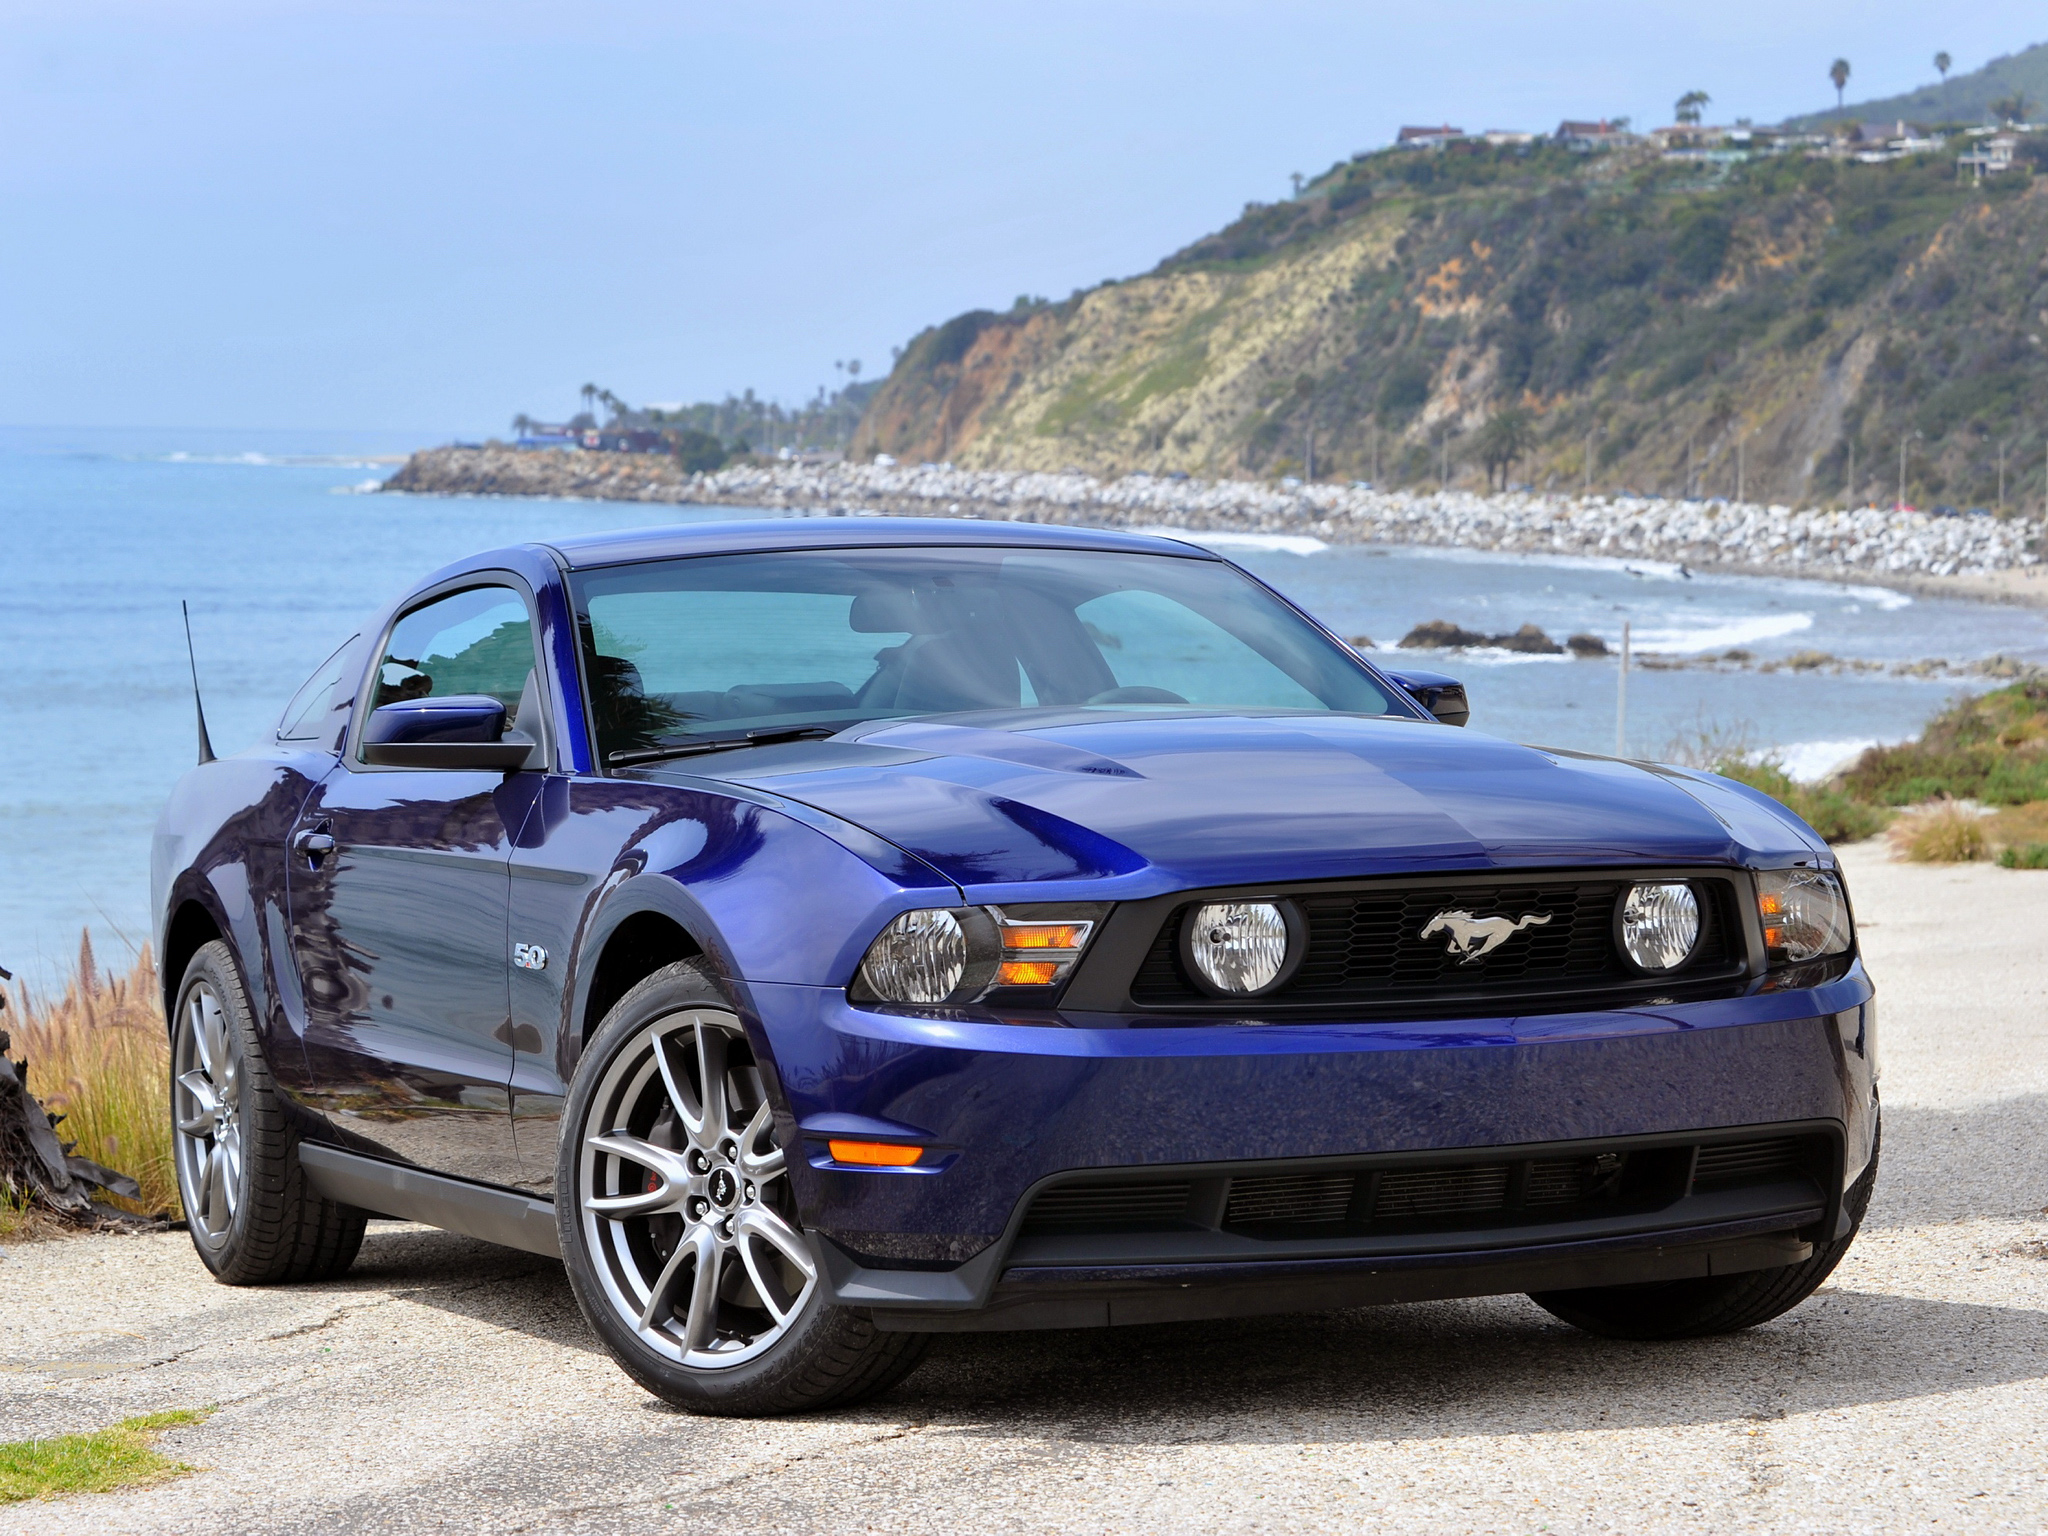 Download full size classic Mustang wallpaper / 2048x1536